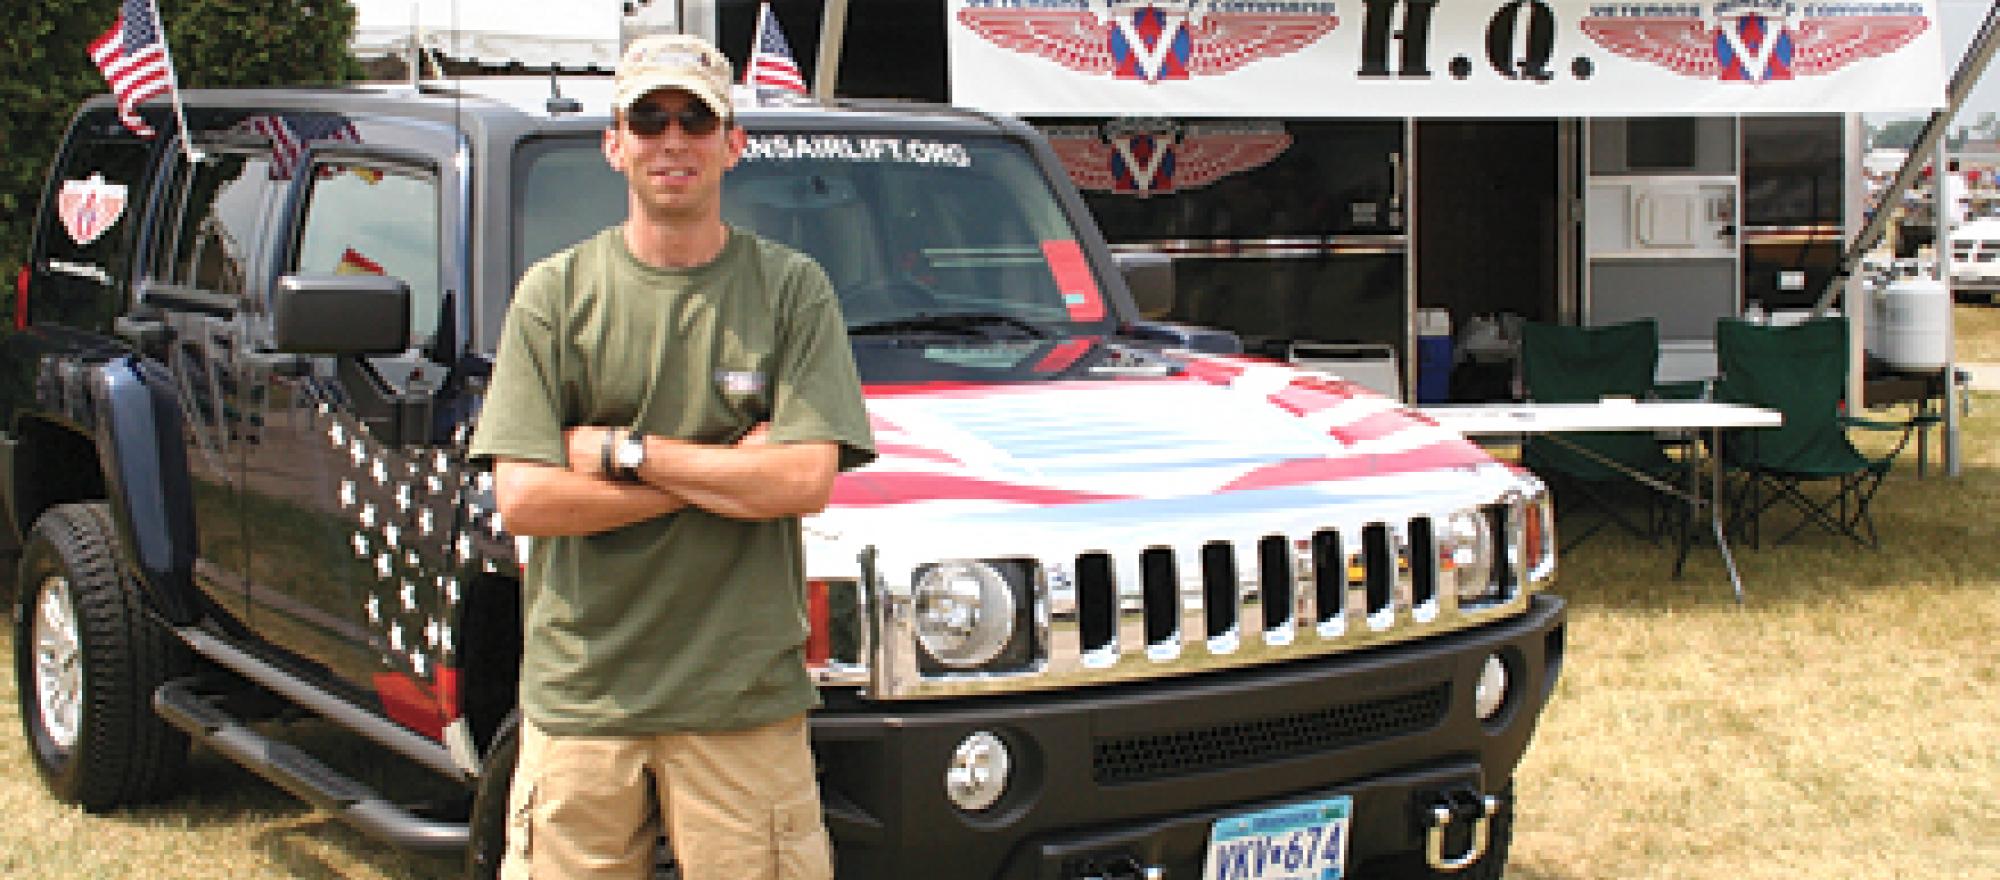 A Hummer donated by General Motors provides ground transportation for veteran